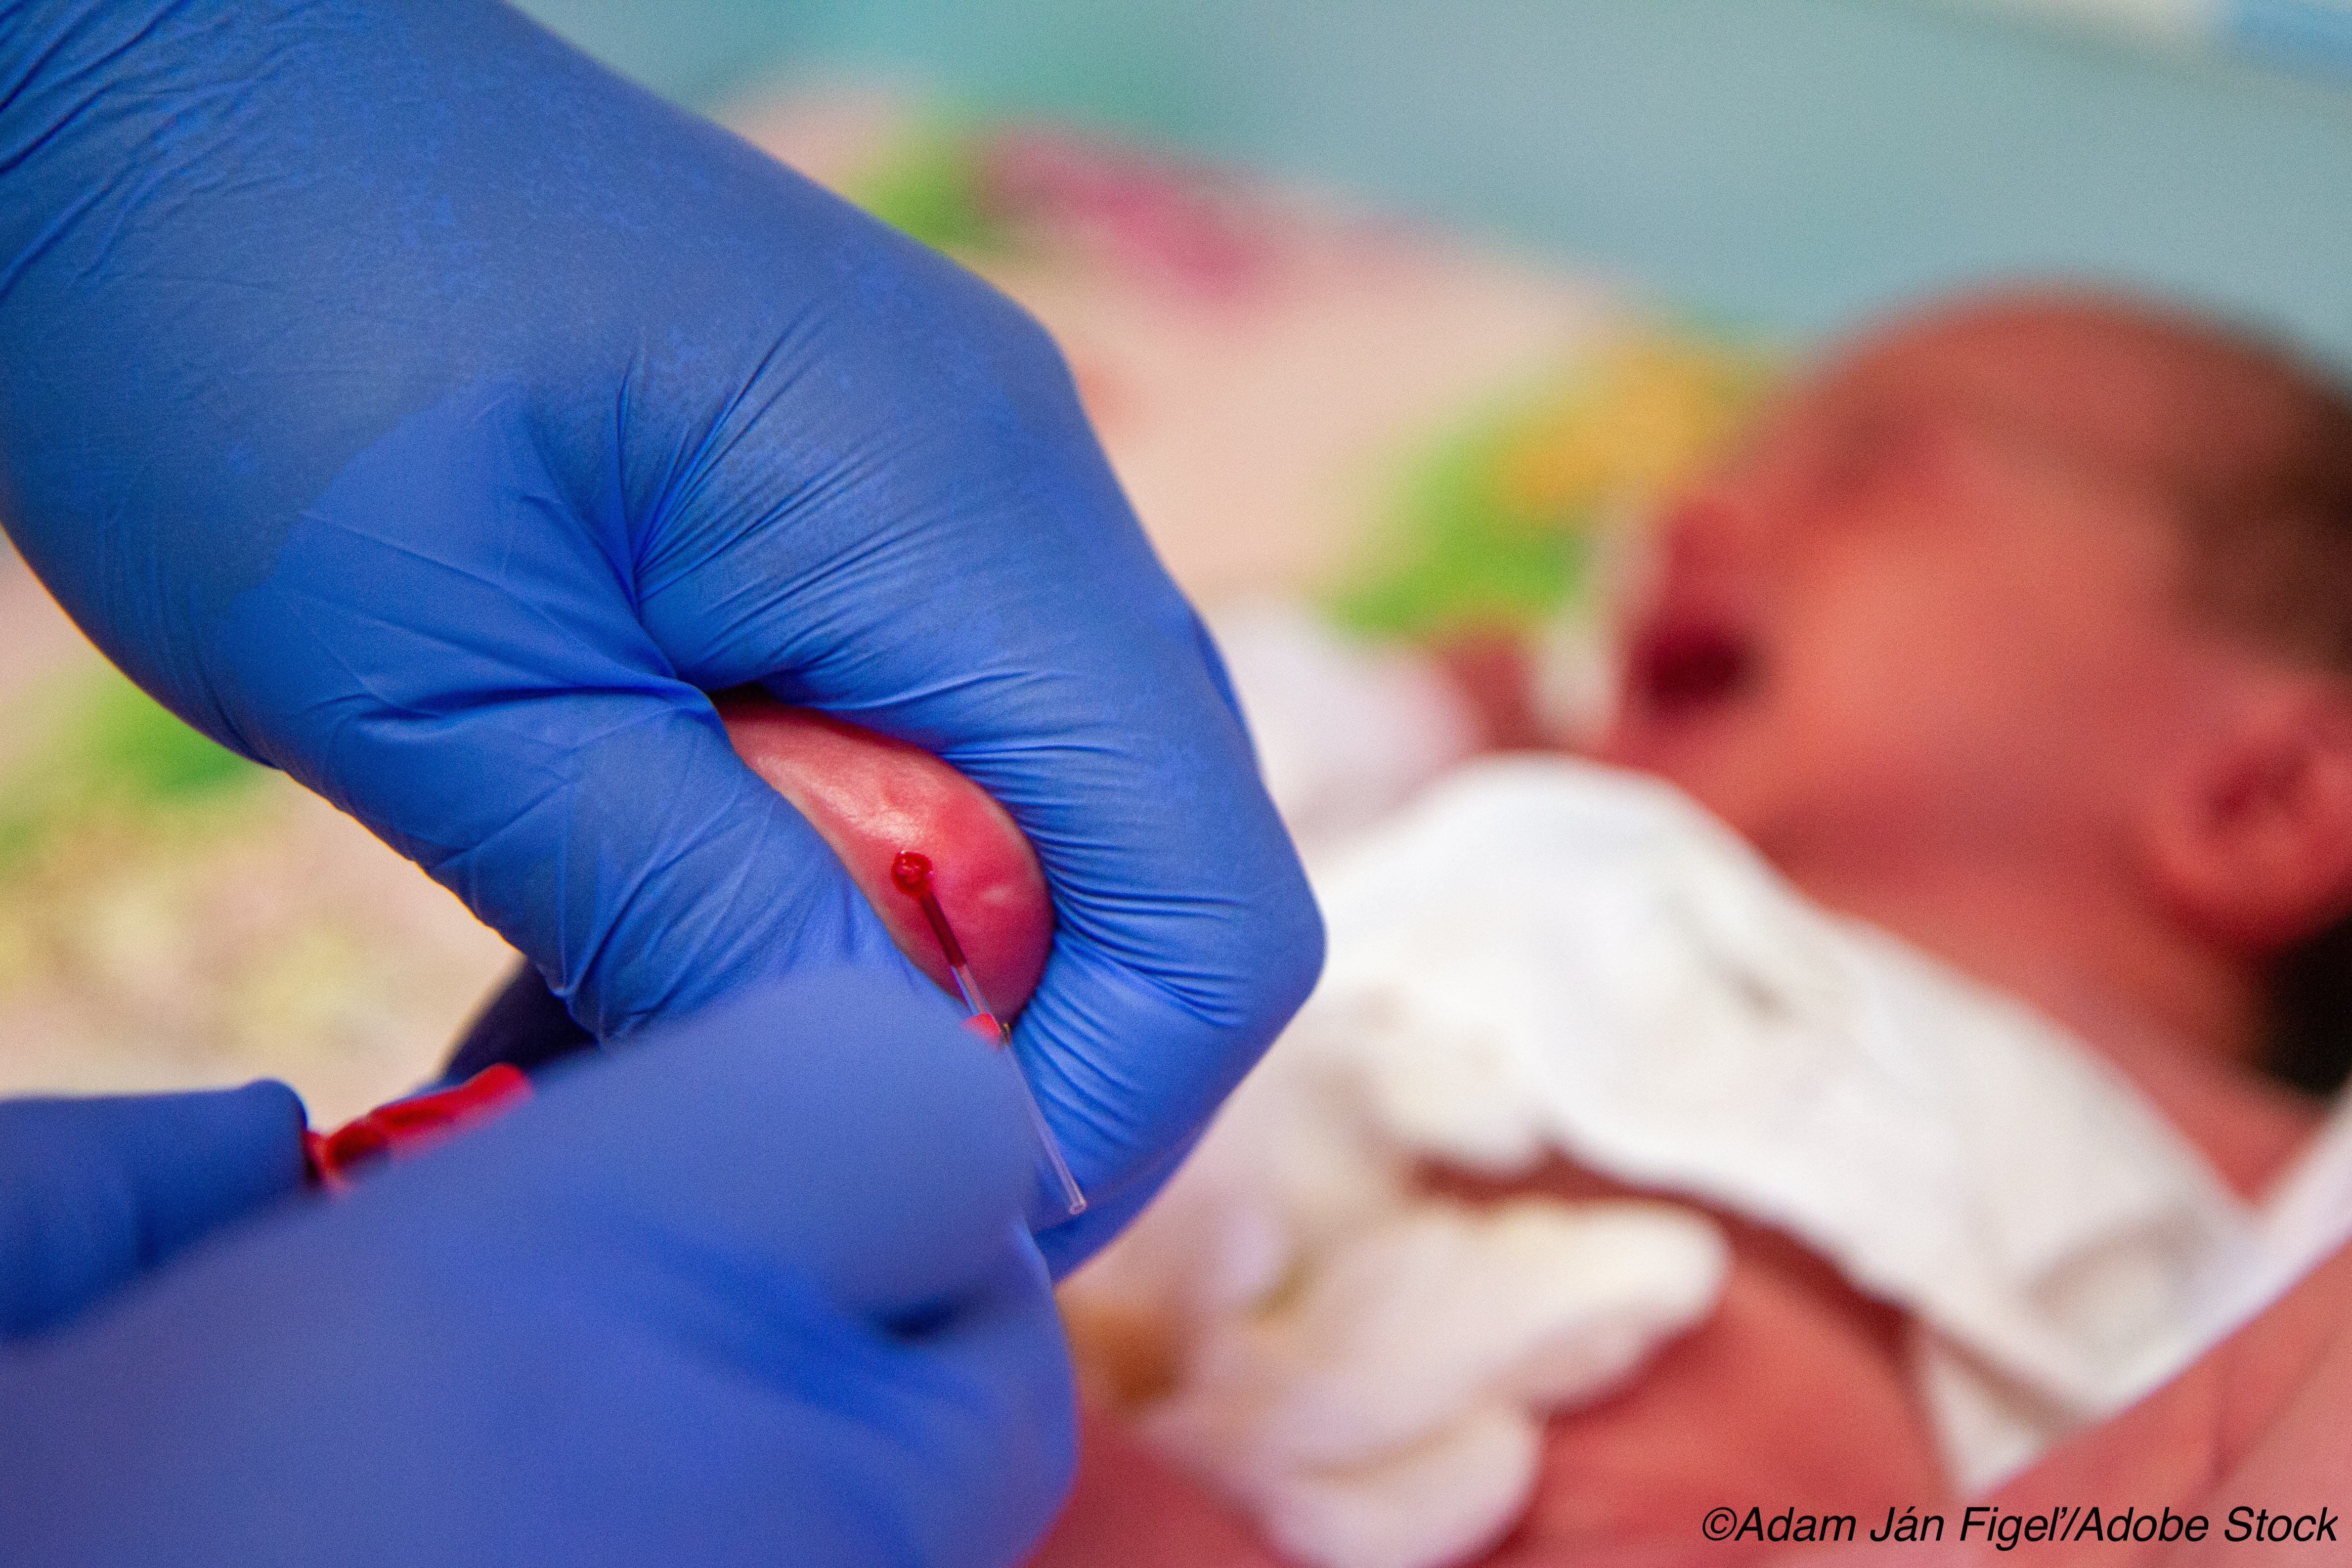 Dried Blood Spot Proves Mettle for CMV in Newborns